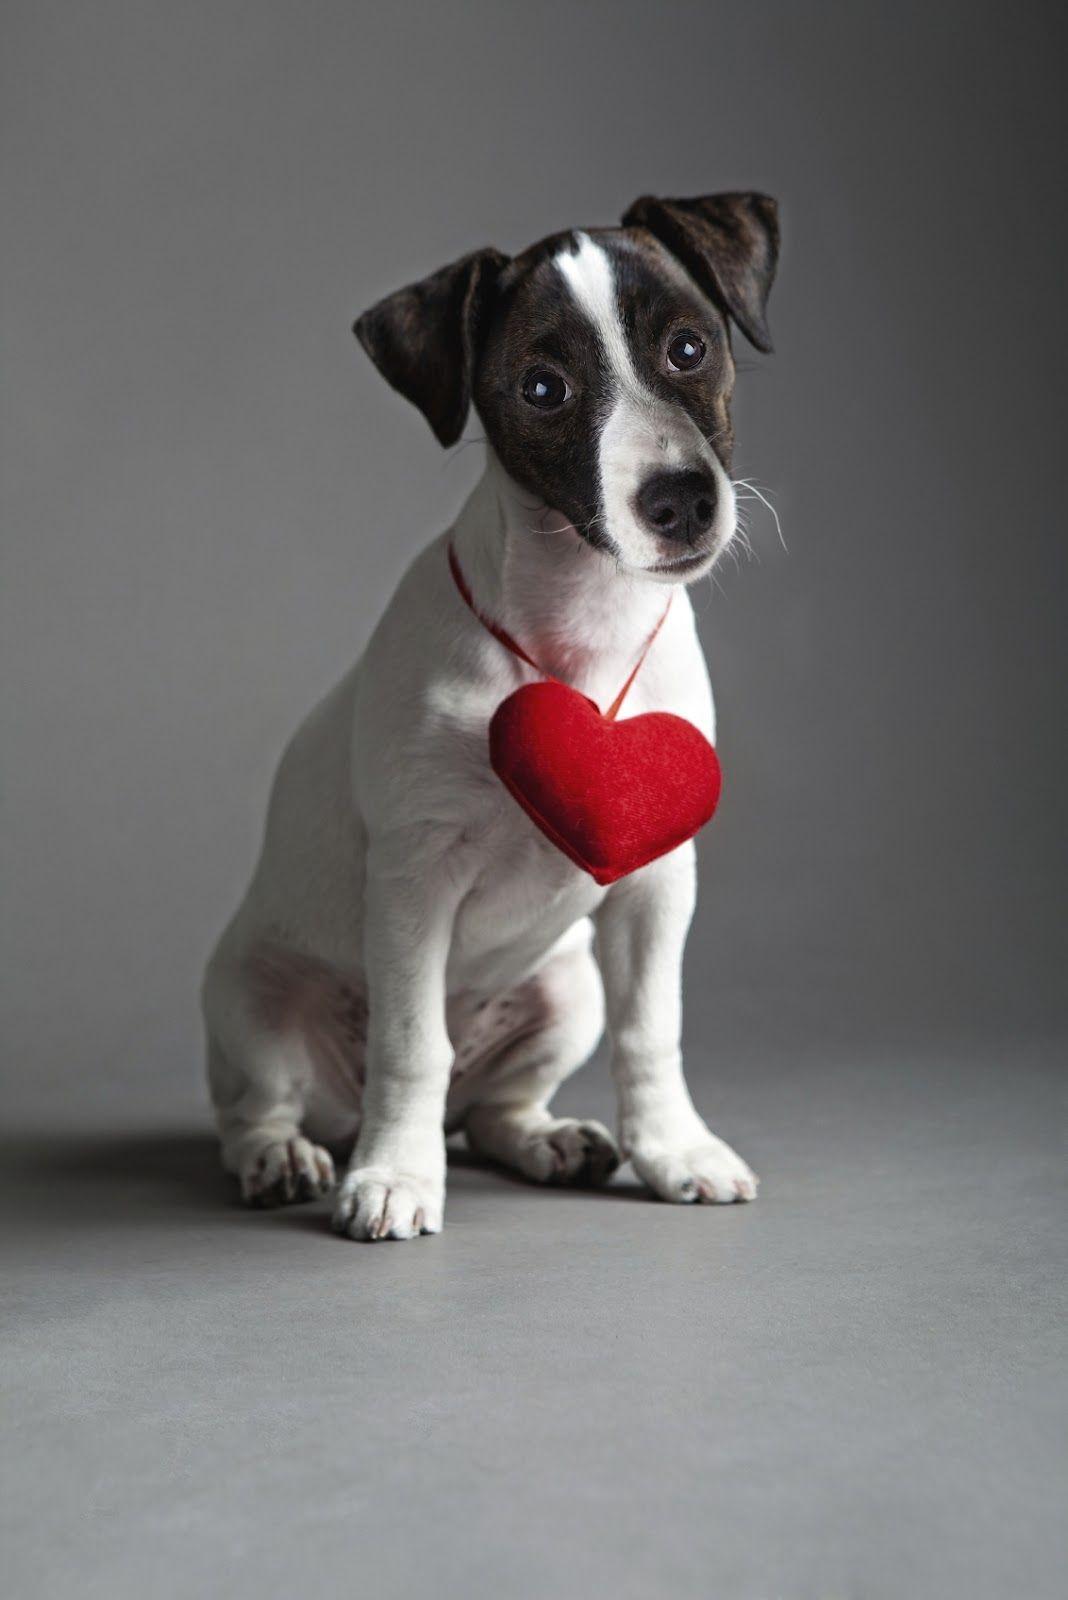 Jack Russell Terrier with heart photo and wallpaper. Beautiful